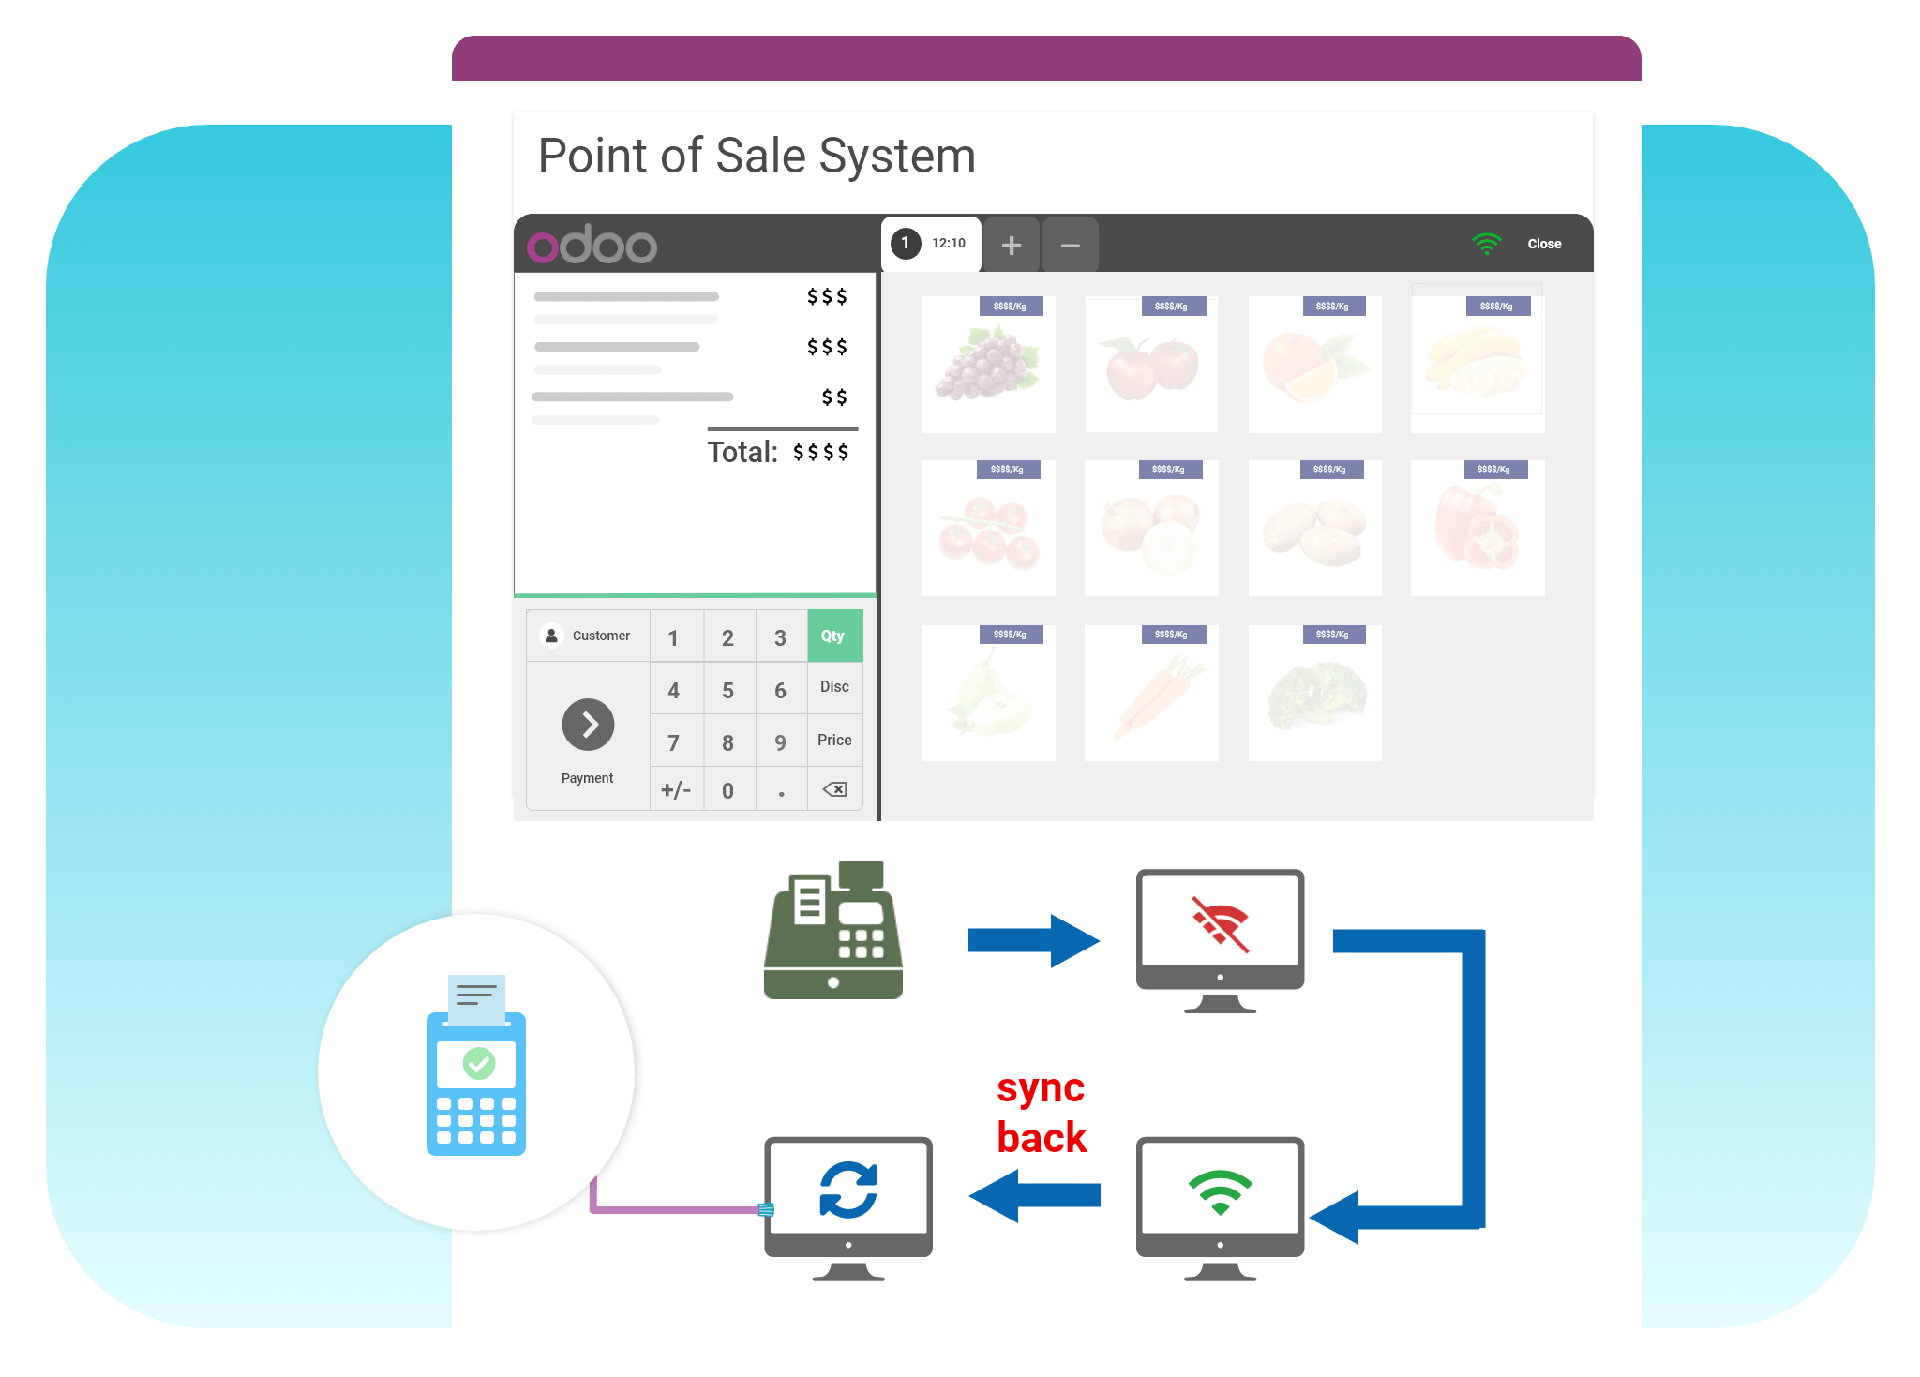 Online POS in Odoo ERP system.